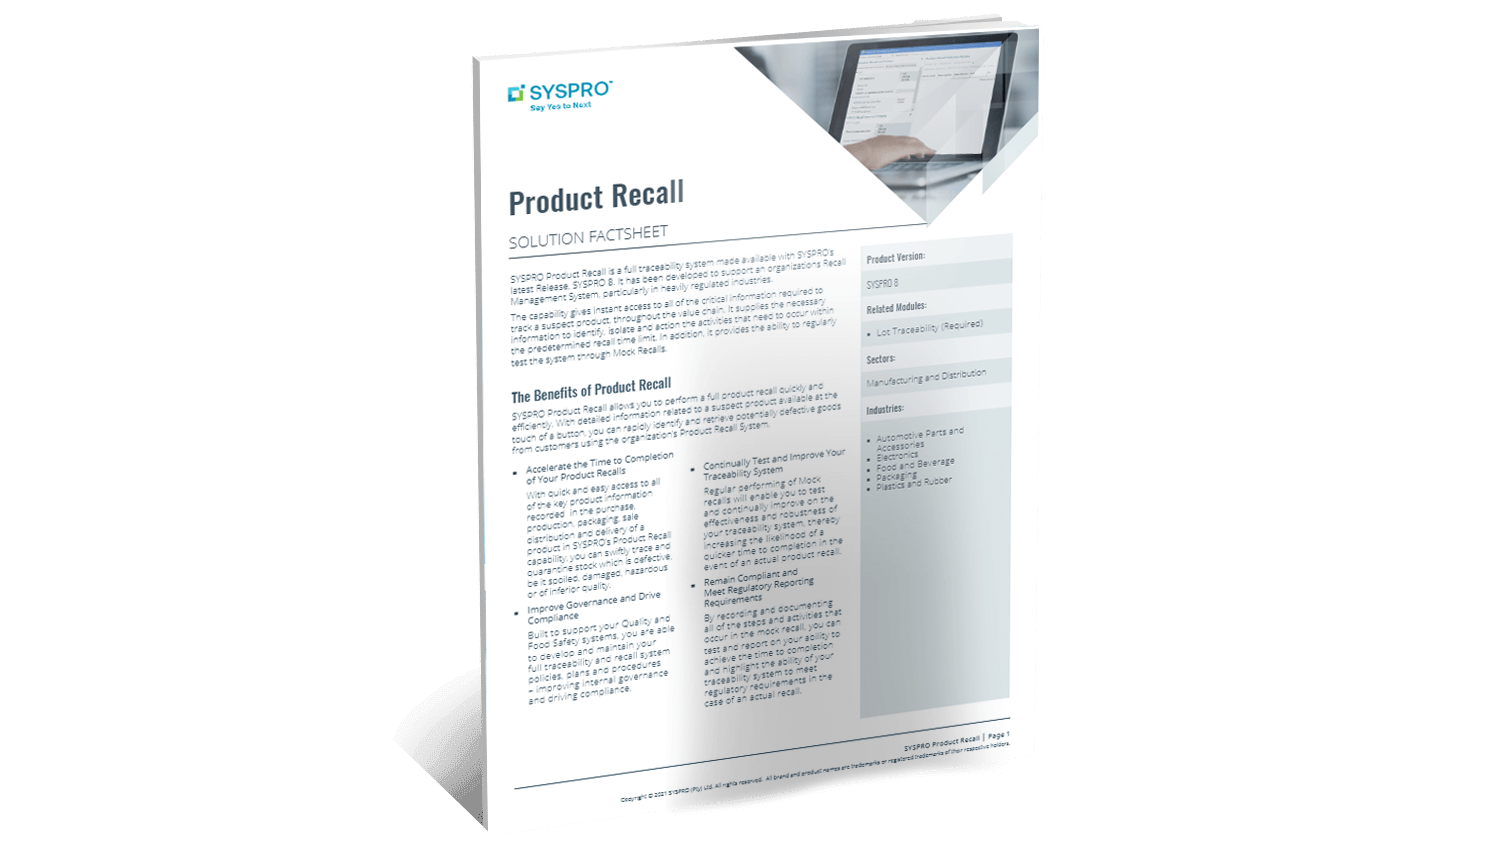 SYSPRO-ERP-software-system-product-recall-factsheet